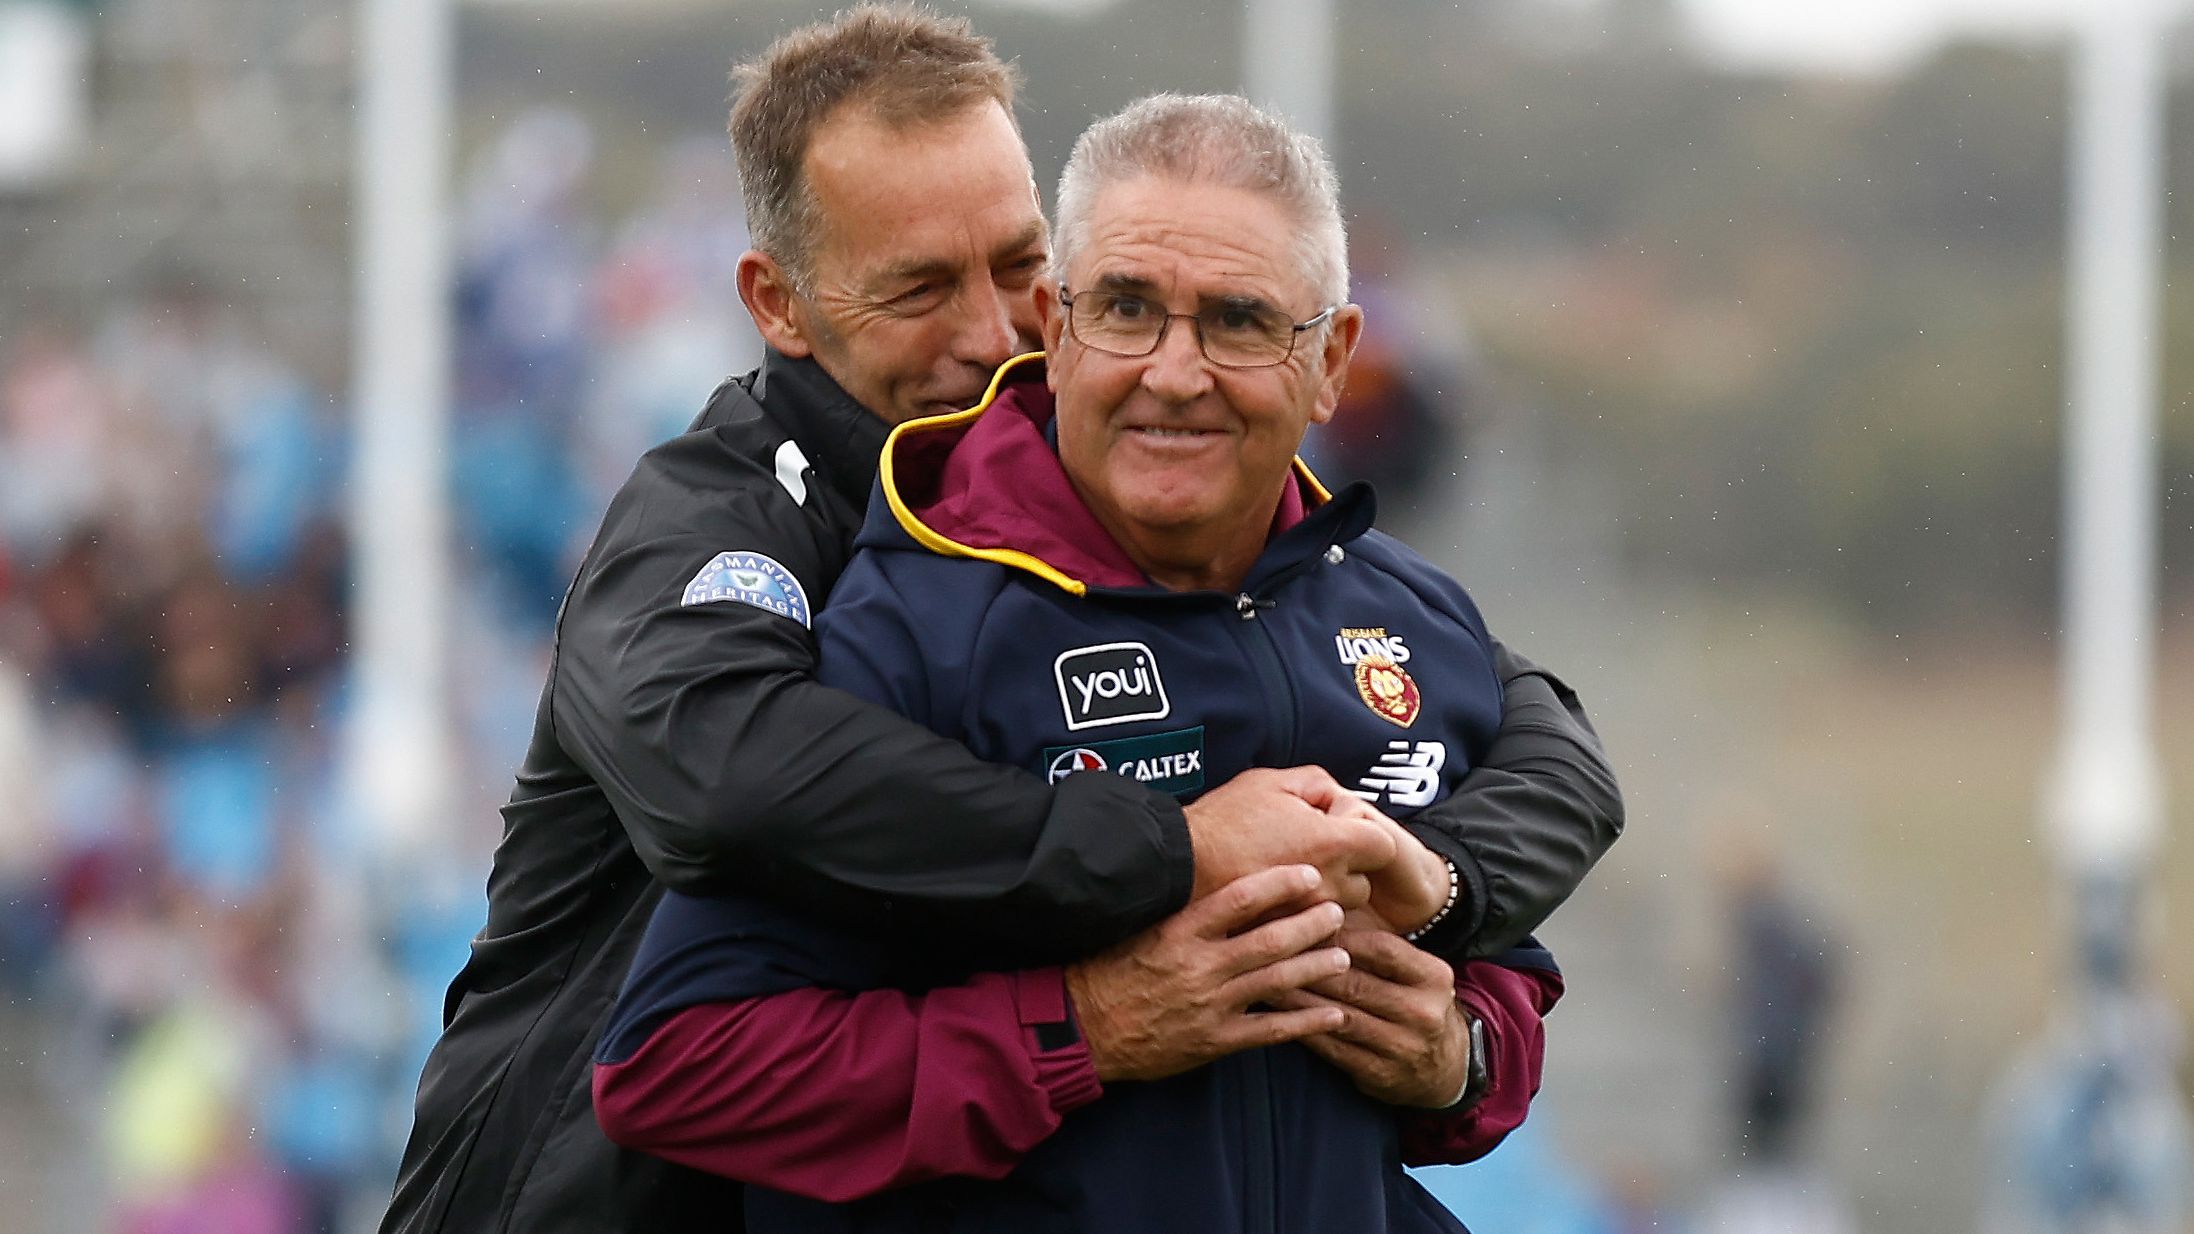 ADELAIDE, AUSTRALIA - APRIL 15: Chris Fagan, Senior Coach of the Lions and Alastair Clarkson, Senior Coach of the Kangaroos embrace before the 2023 AFL Round 05 match between the Brisbane Lions and the North Melbourne Kangaroos at Adelaide Hills on April 15, 2023 in Adelaide, Australia. (Photo by Michael Willson/AFL Photos)